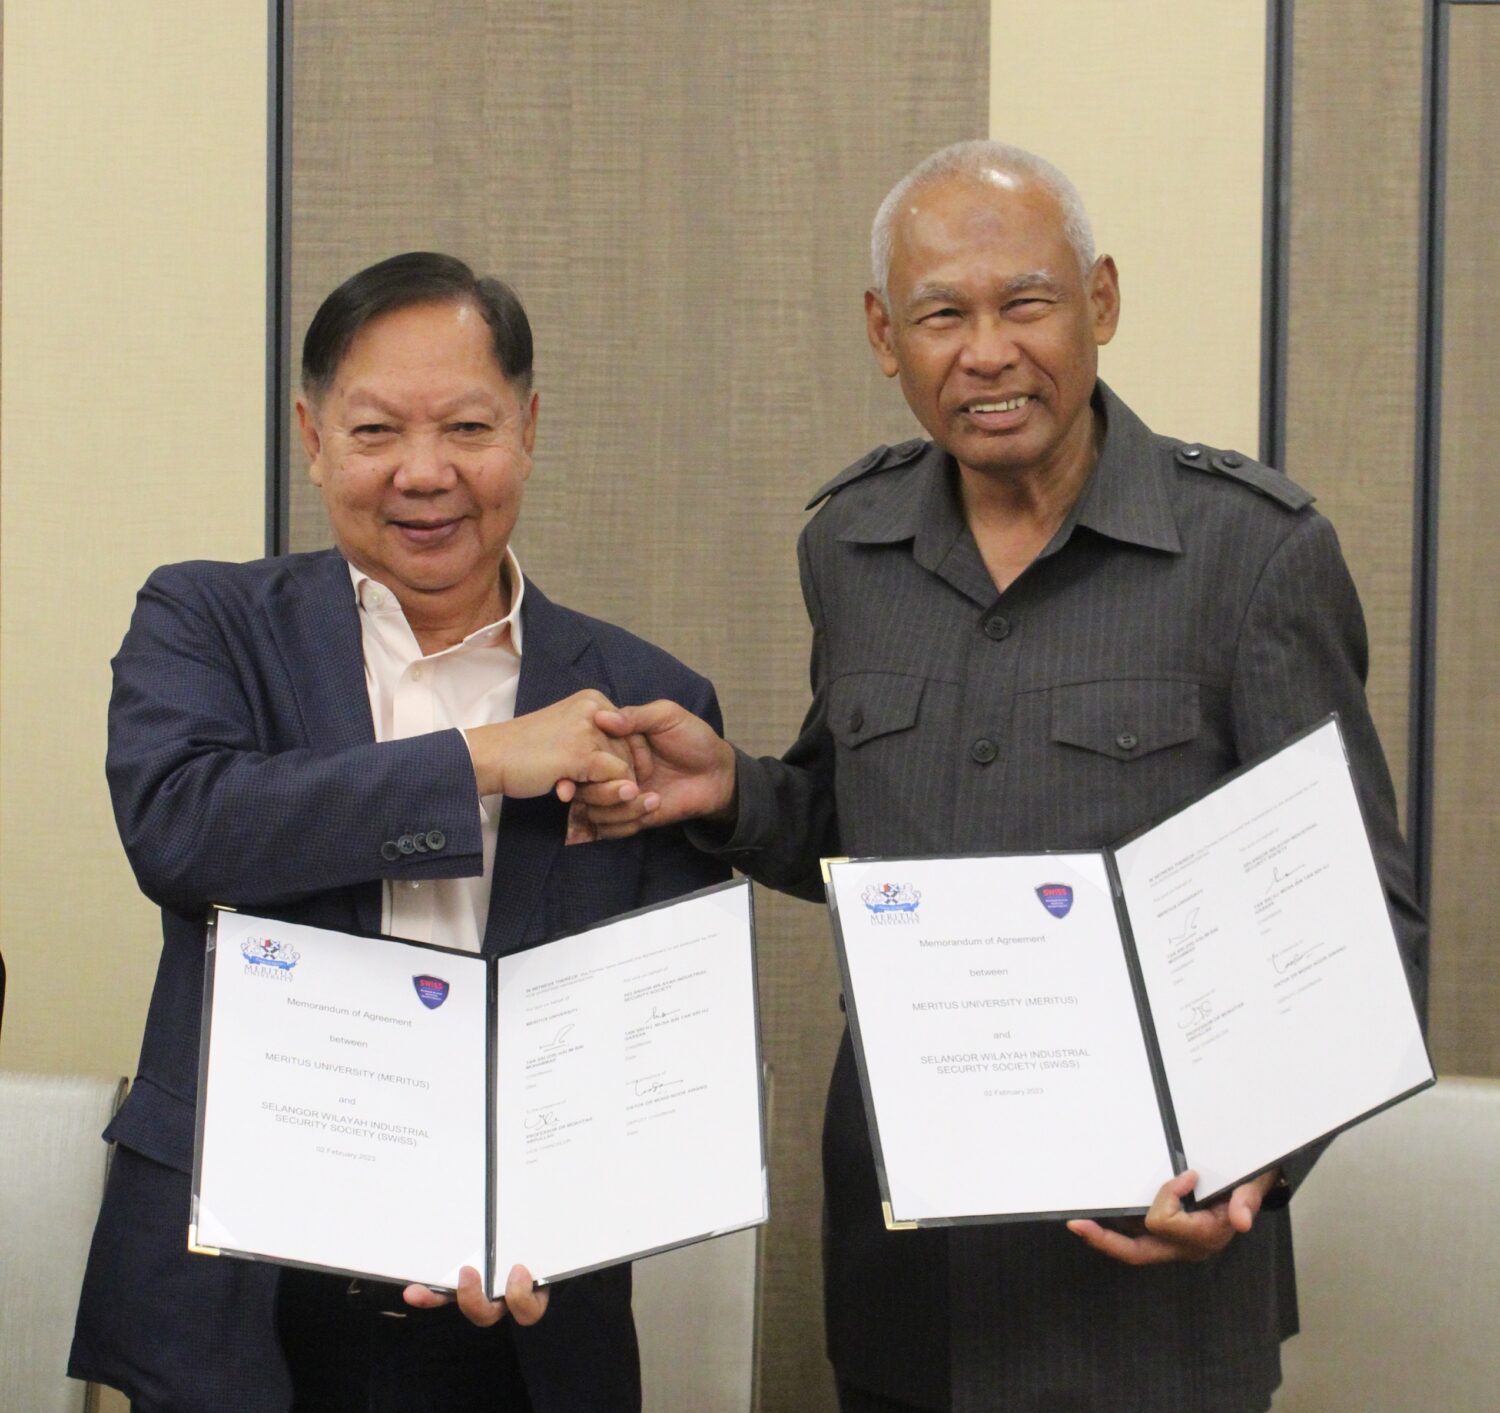 Meritus University collaborates with Selangor Wilayah Industrial Security Society